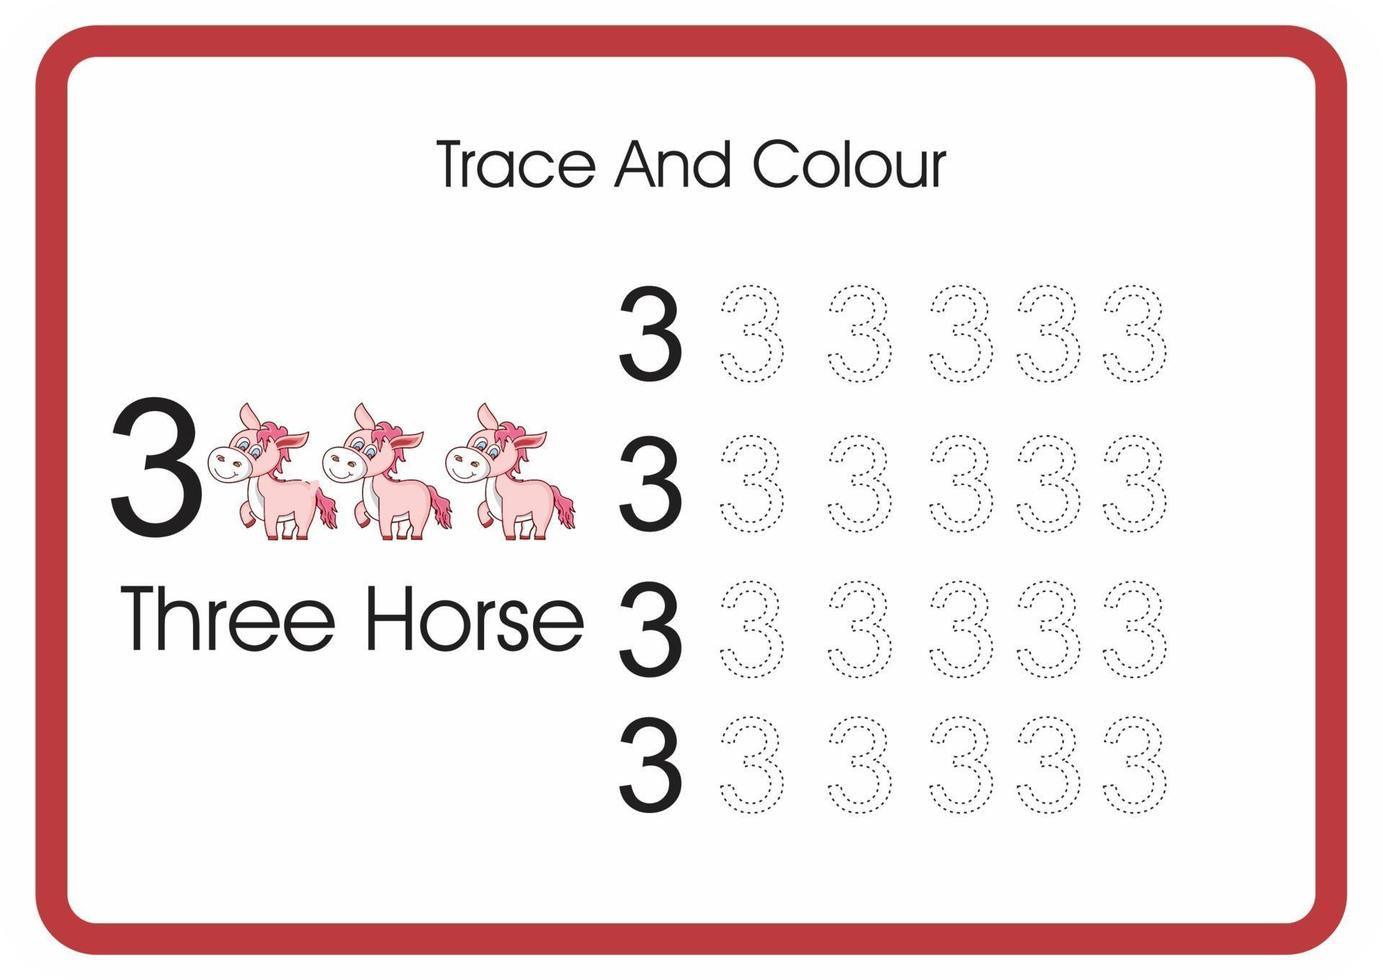 count trace an colour horse number 3 vector